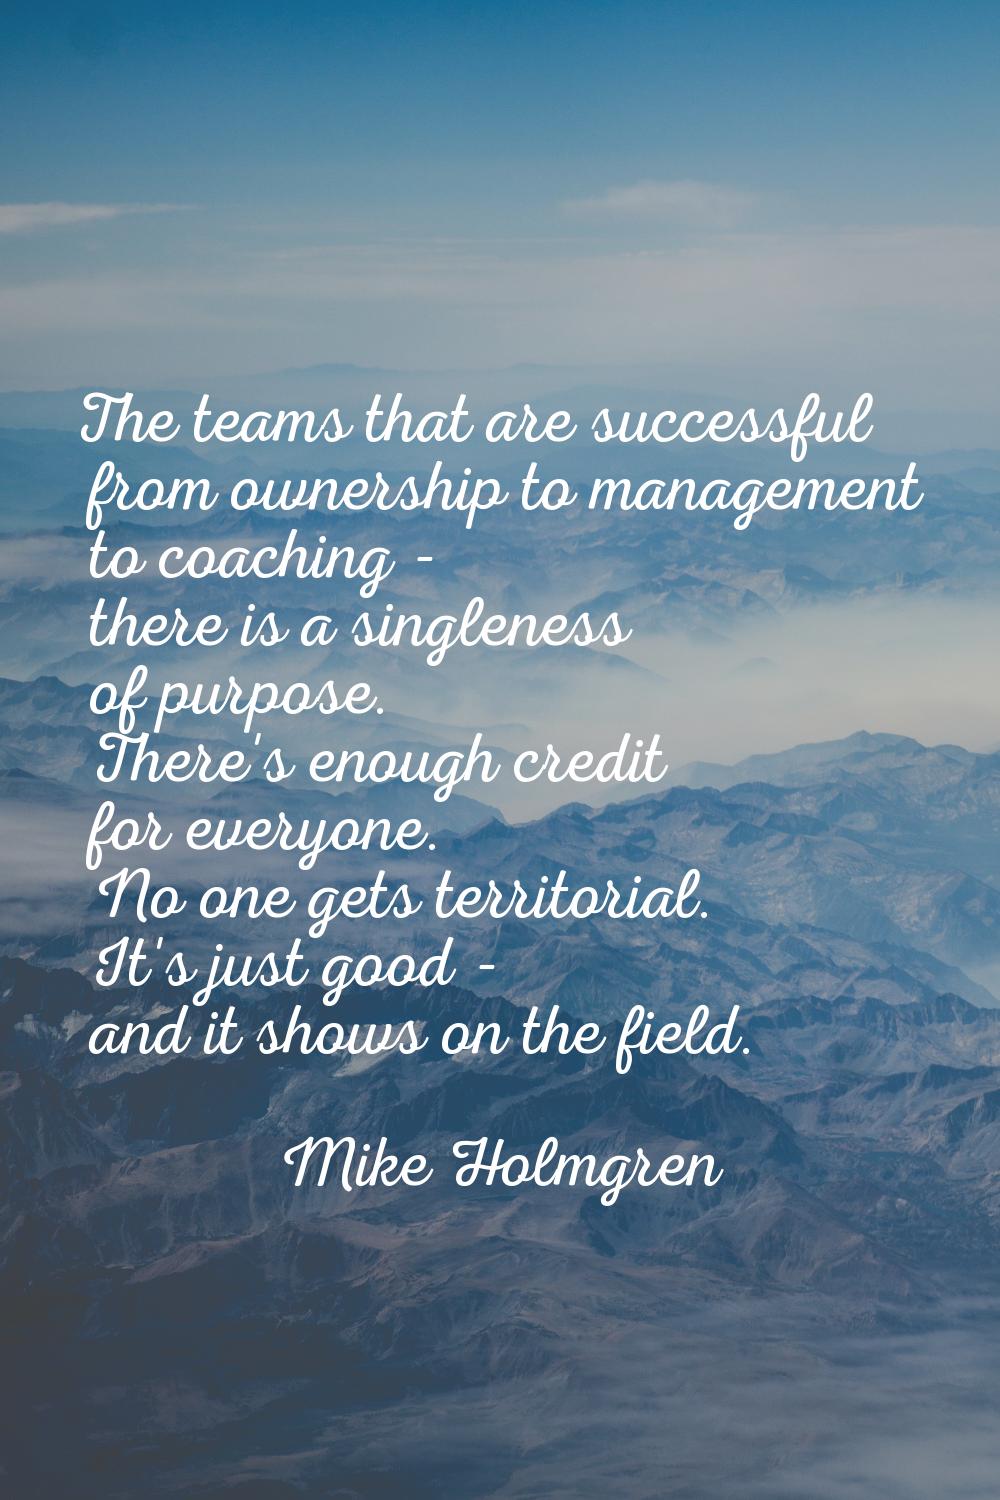 The teams that are successful from ownership to management to coaching - there is a singleness of p